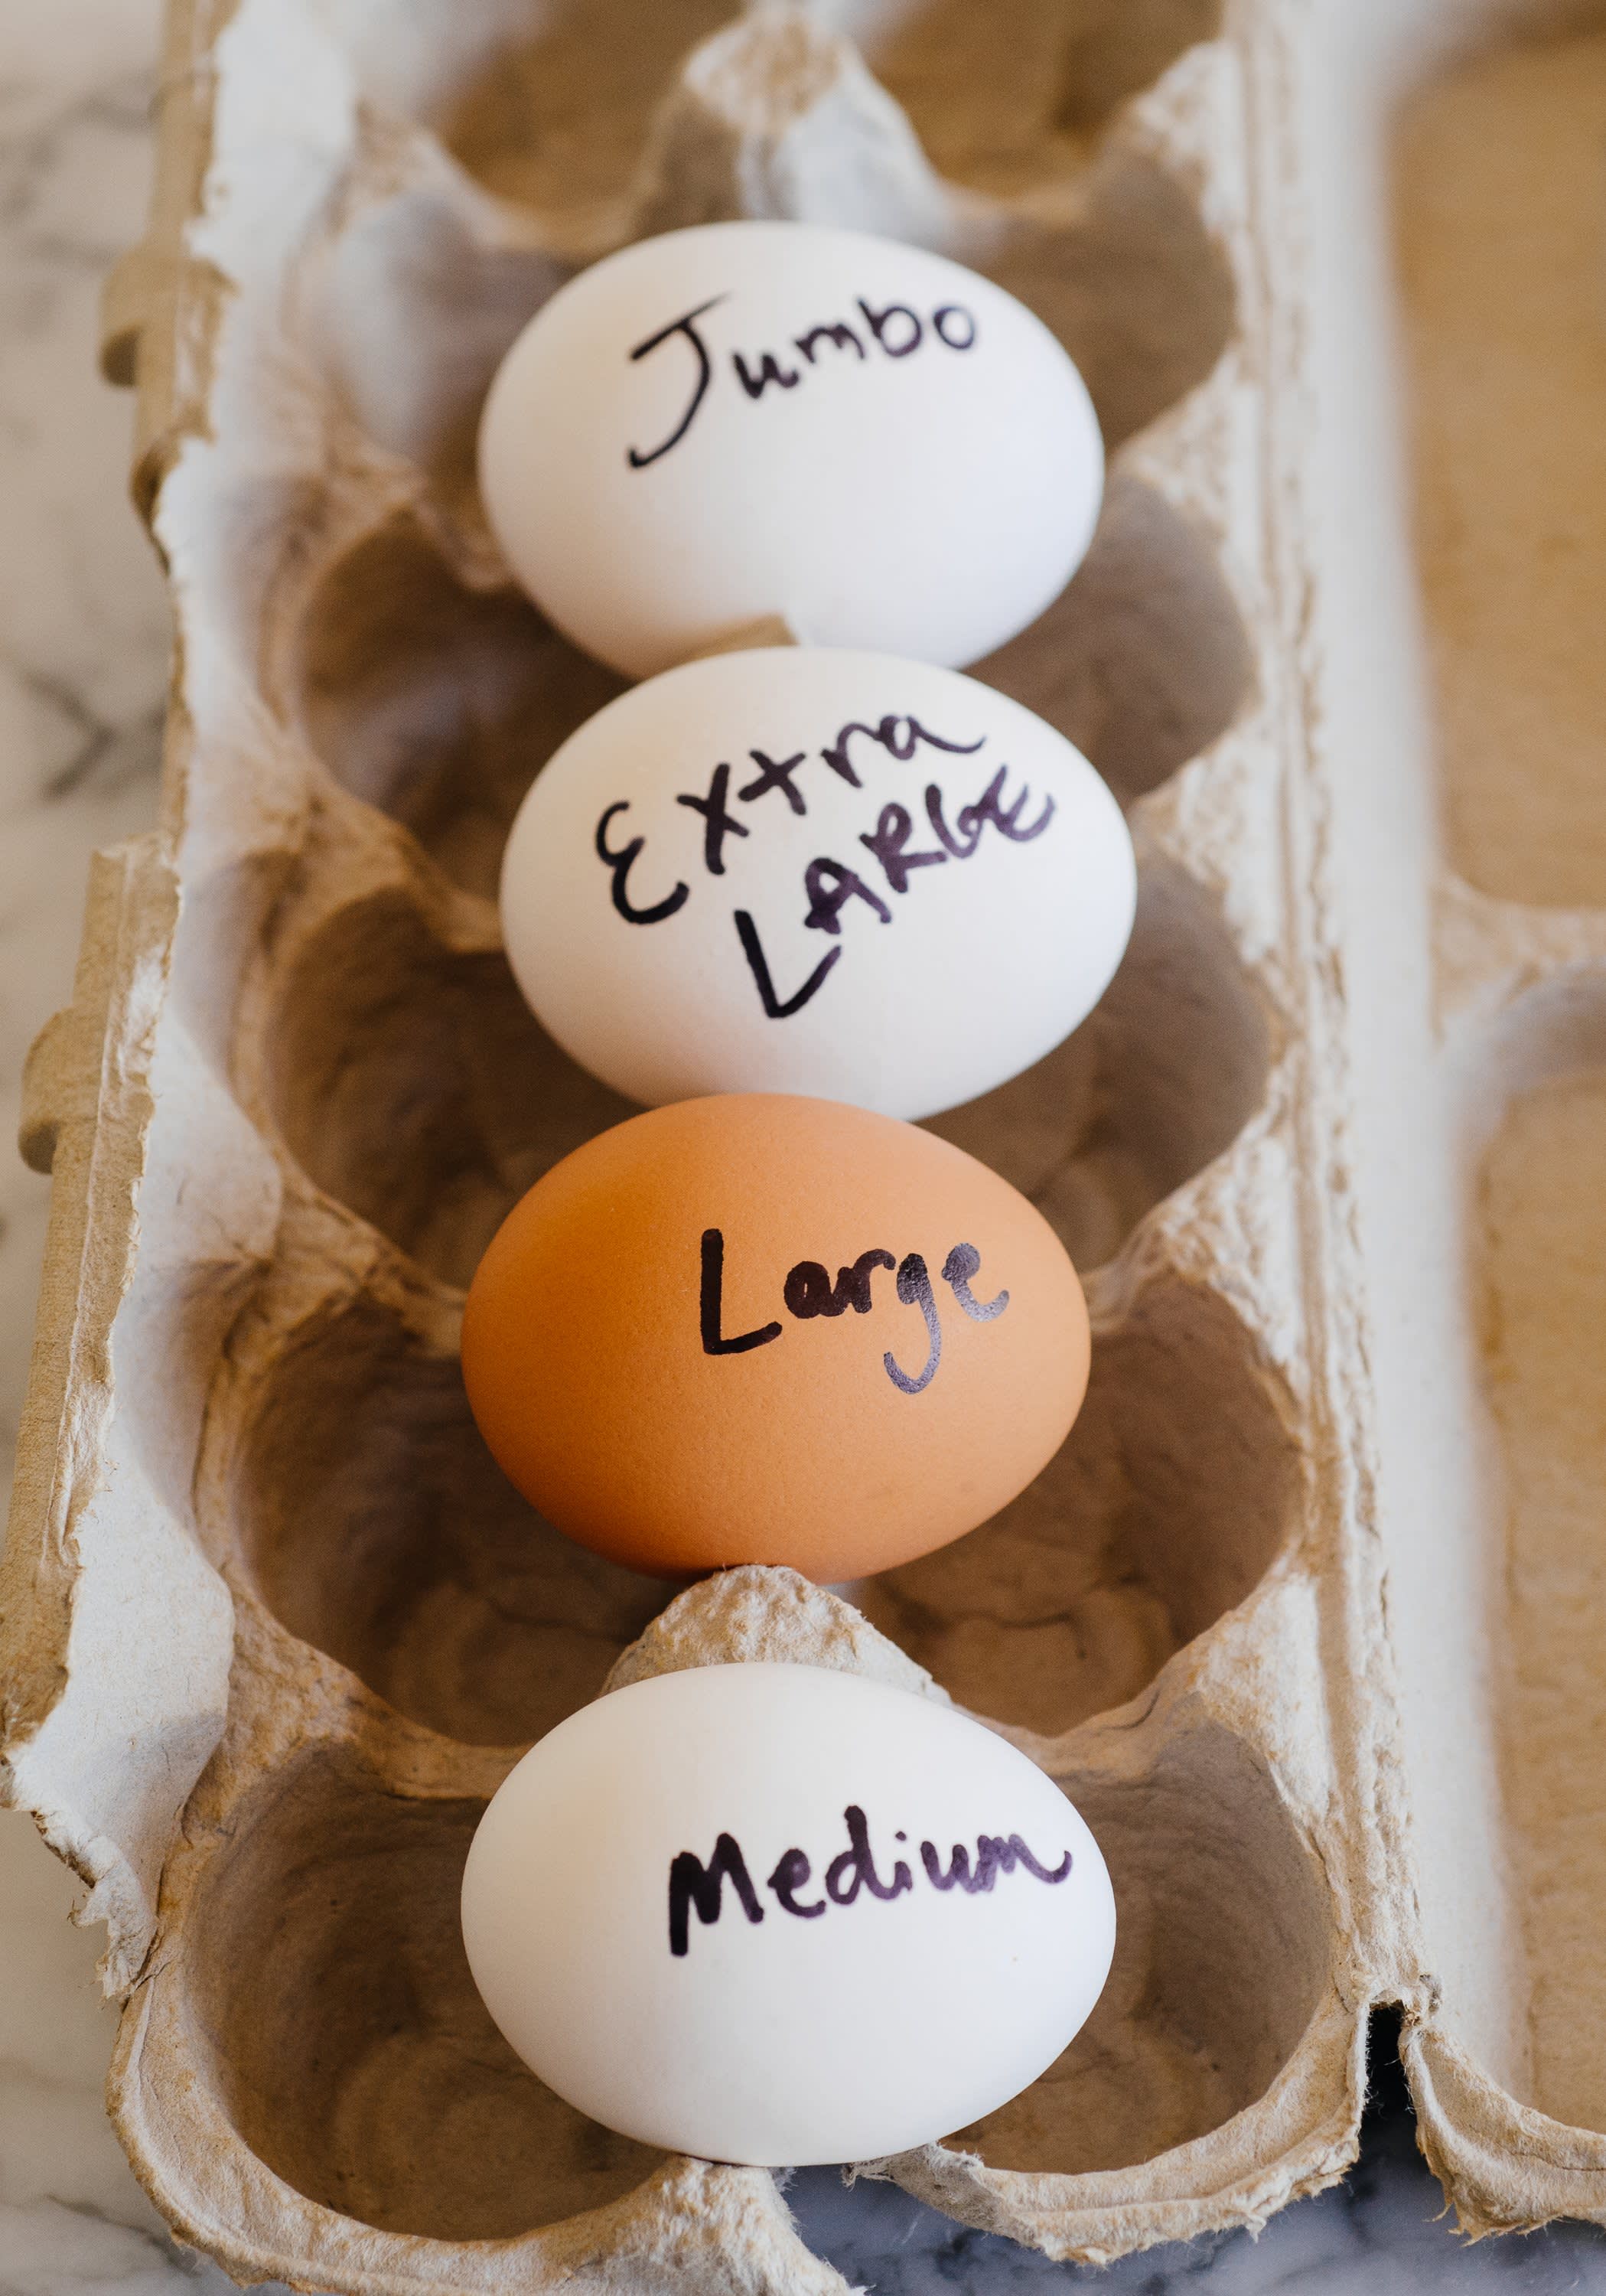 Top 5 Best Layers for Jumbo & Extra Large Eggs - The Egg Carton Store Blog